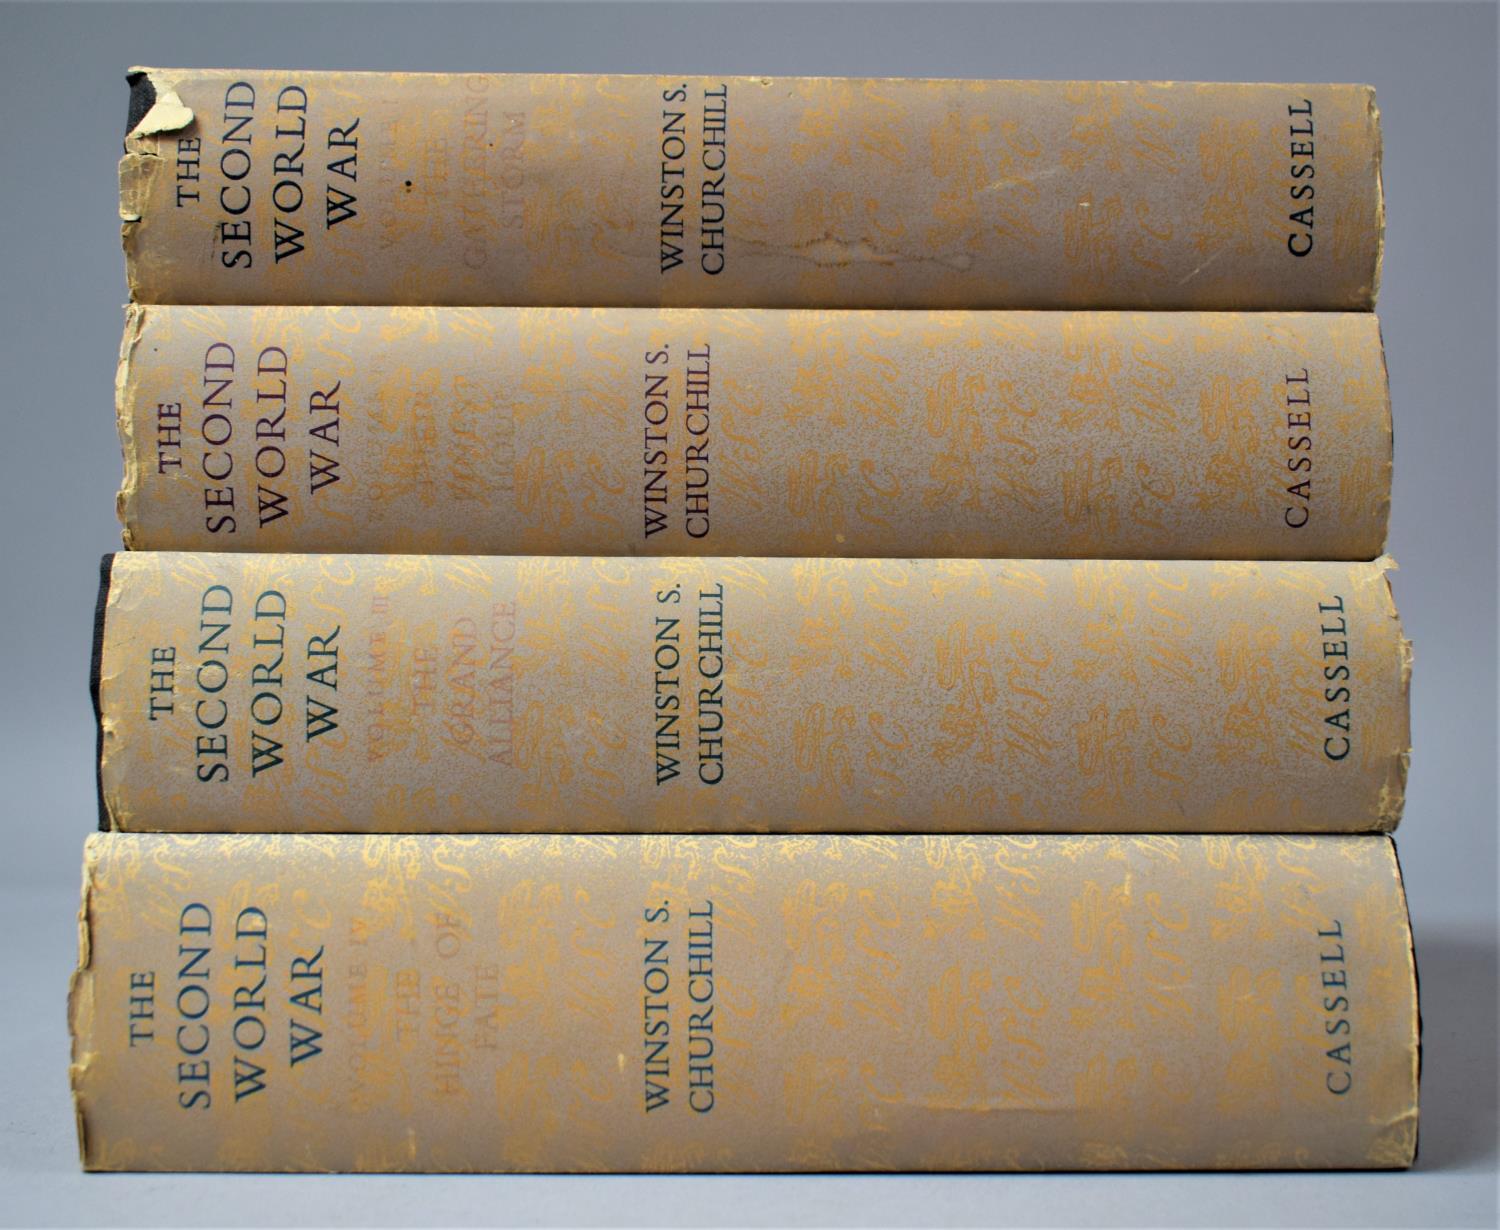 A Set of Four Volumes of The Second World War by Winston Churchill Published by Cassel, Complete